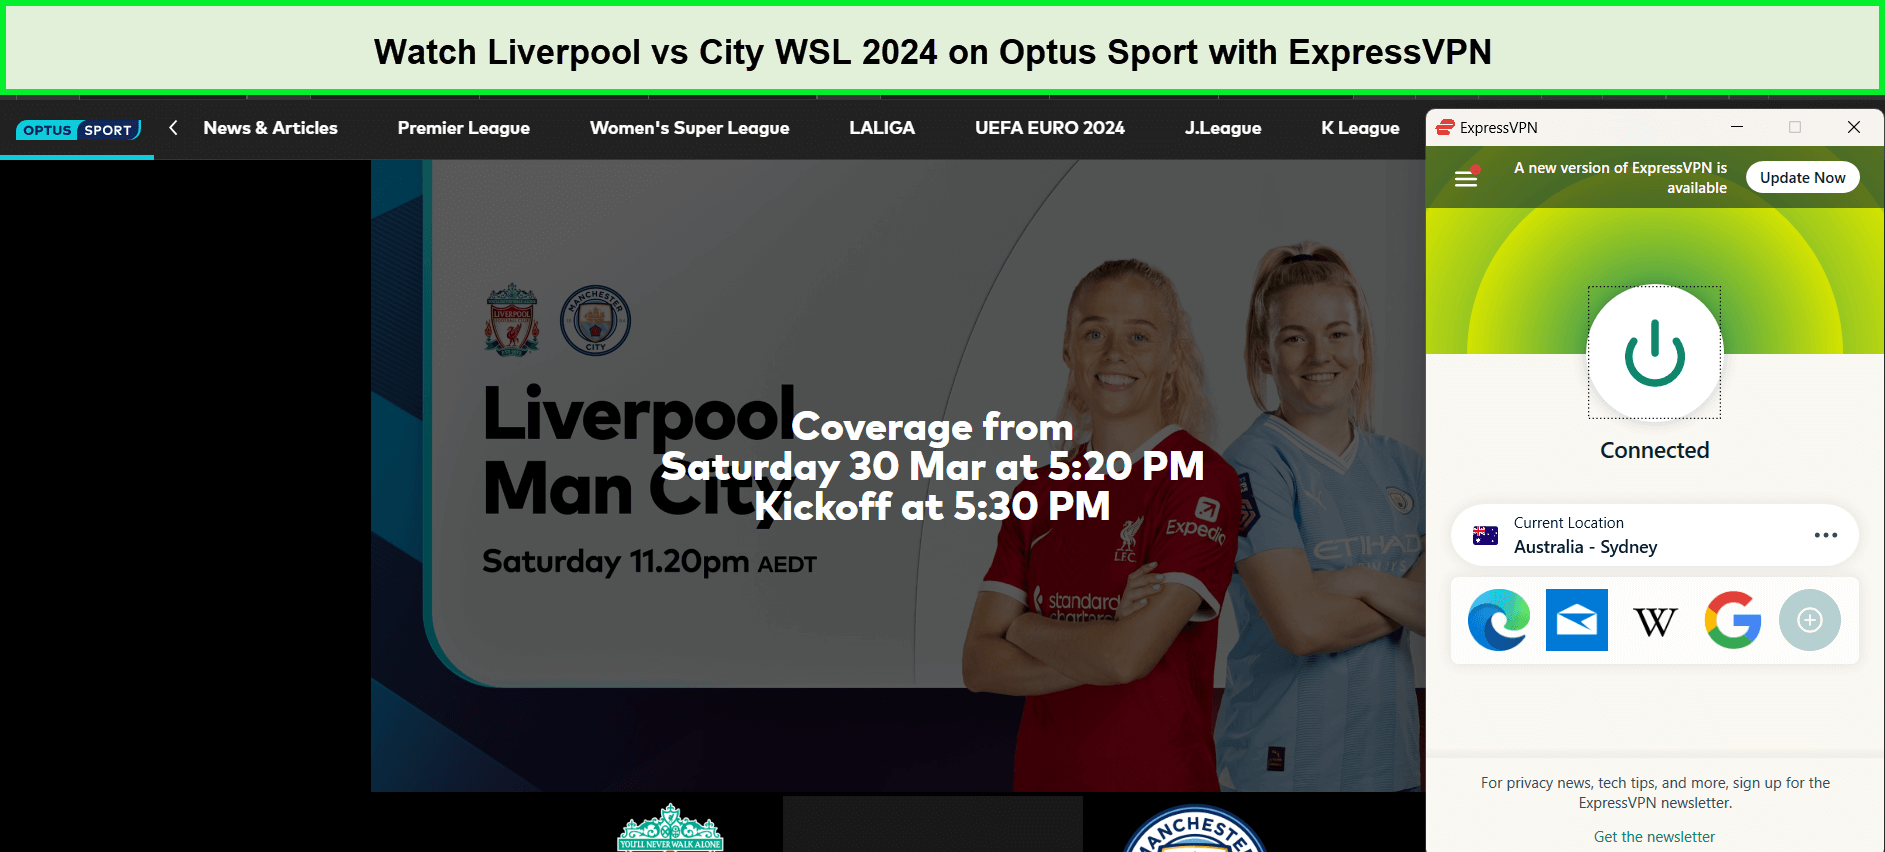 watch-Liverpool-vs-City-WSL-2024-in-France-on-Optus-Sport-with-expressvpn